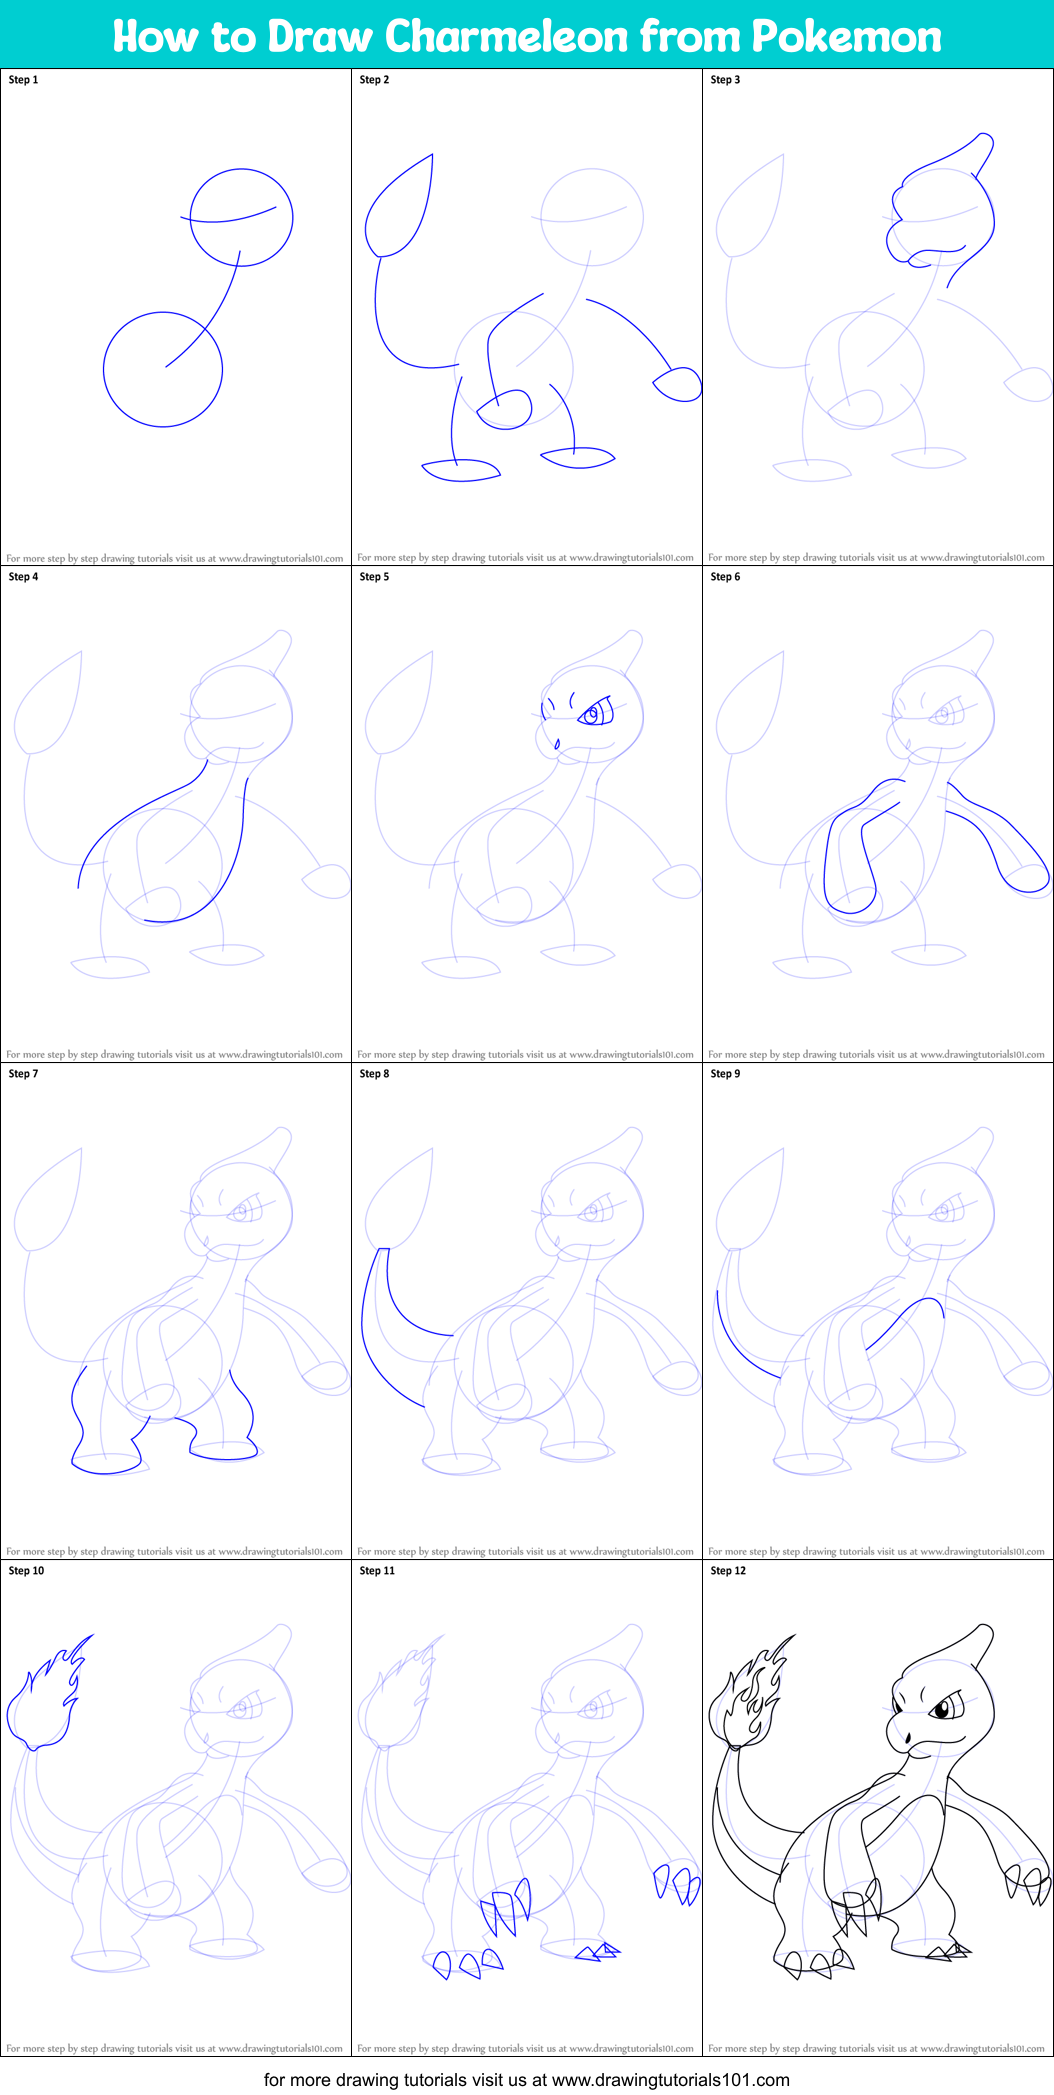 How to Draw Charmeleon from Pokemon printable step by step drawing